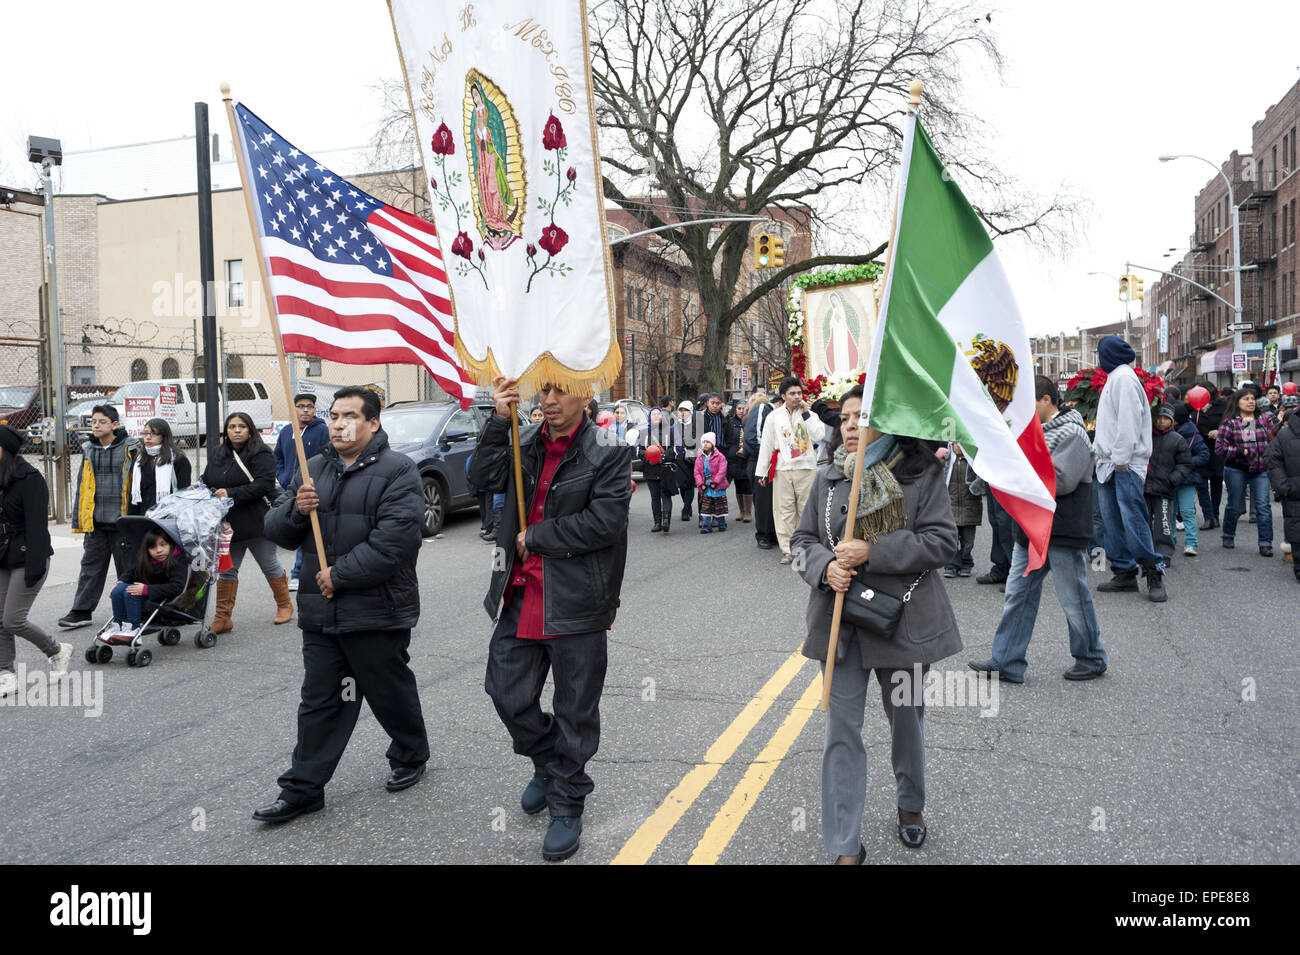 Festival of the Virgin of Guadalupe, the patron Saint of Mexico, Borough Park, Brooklyn, 2012. Stock Photo